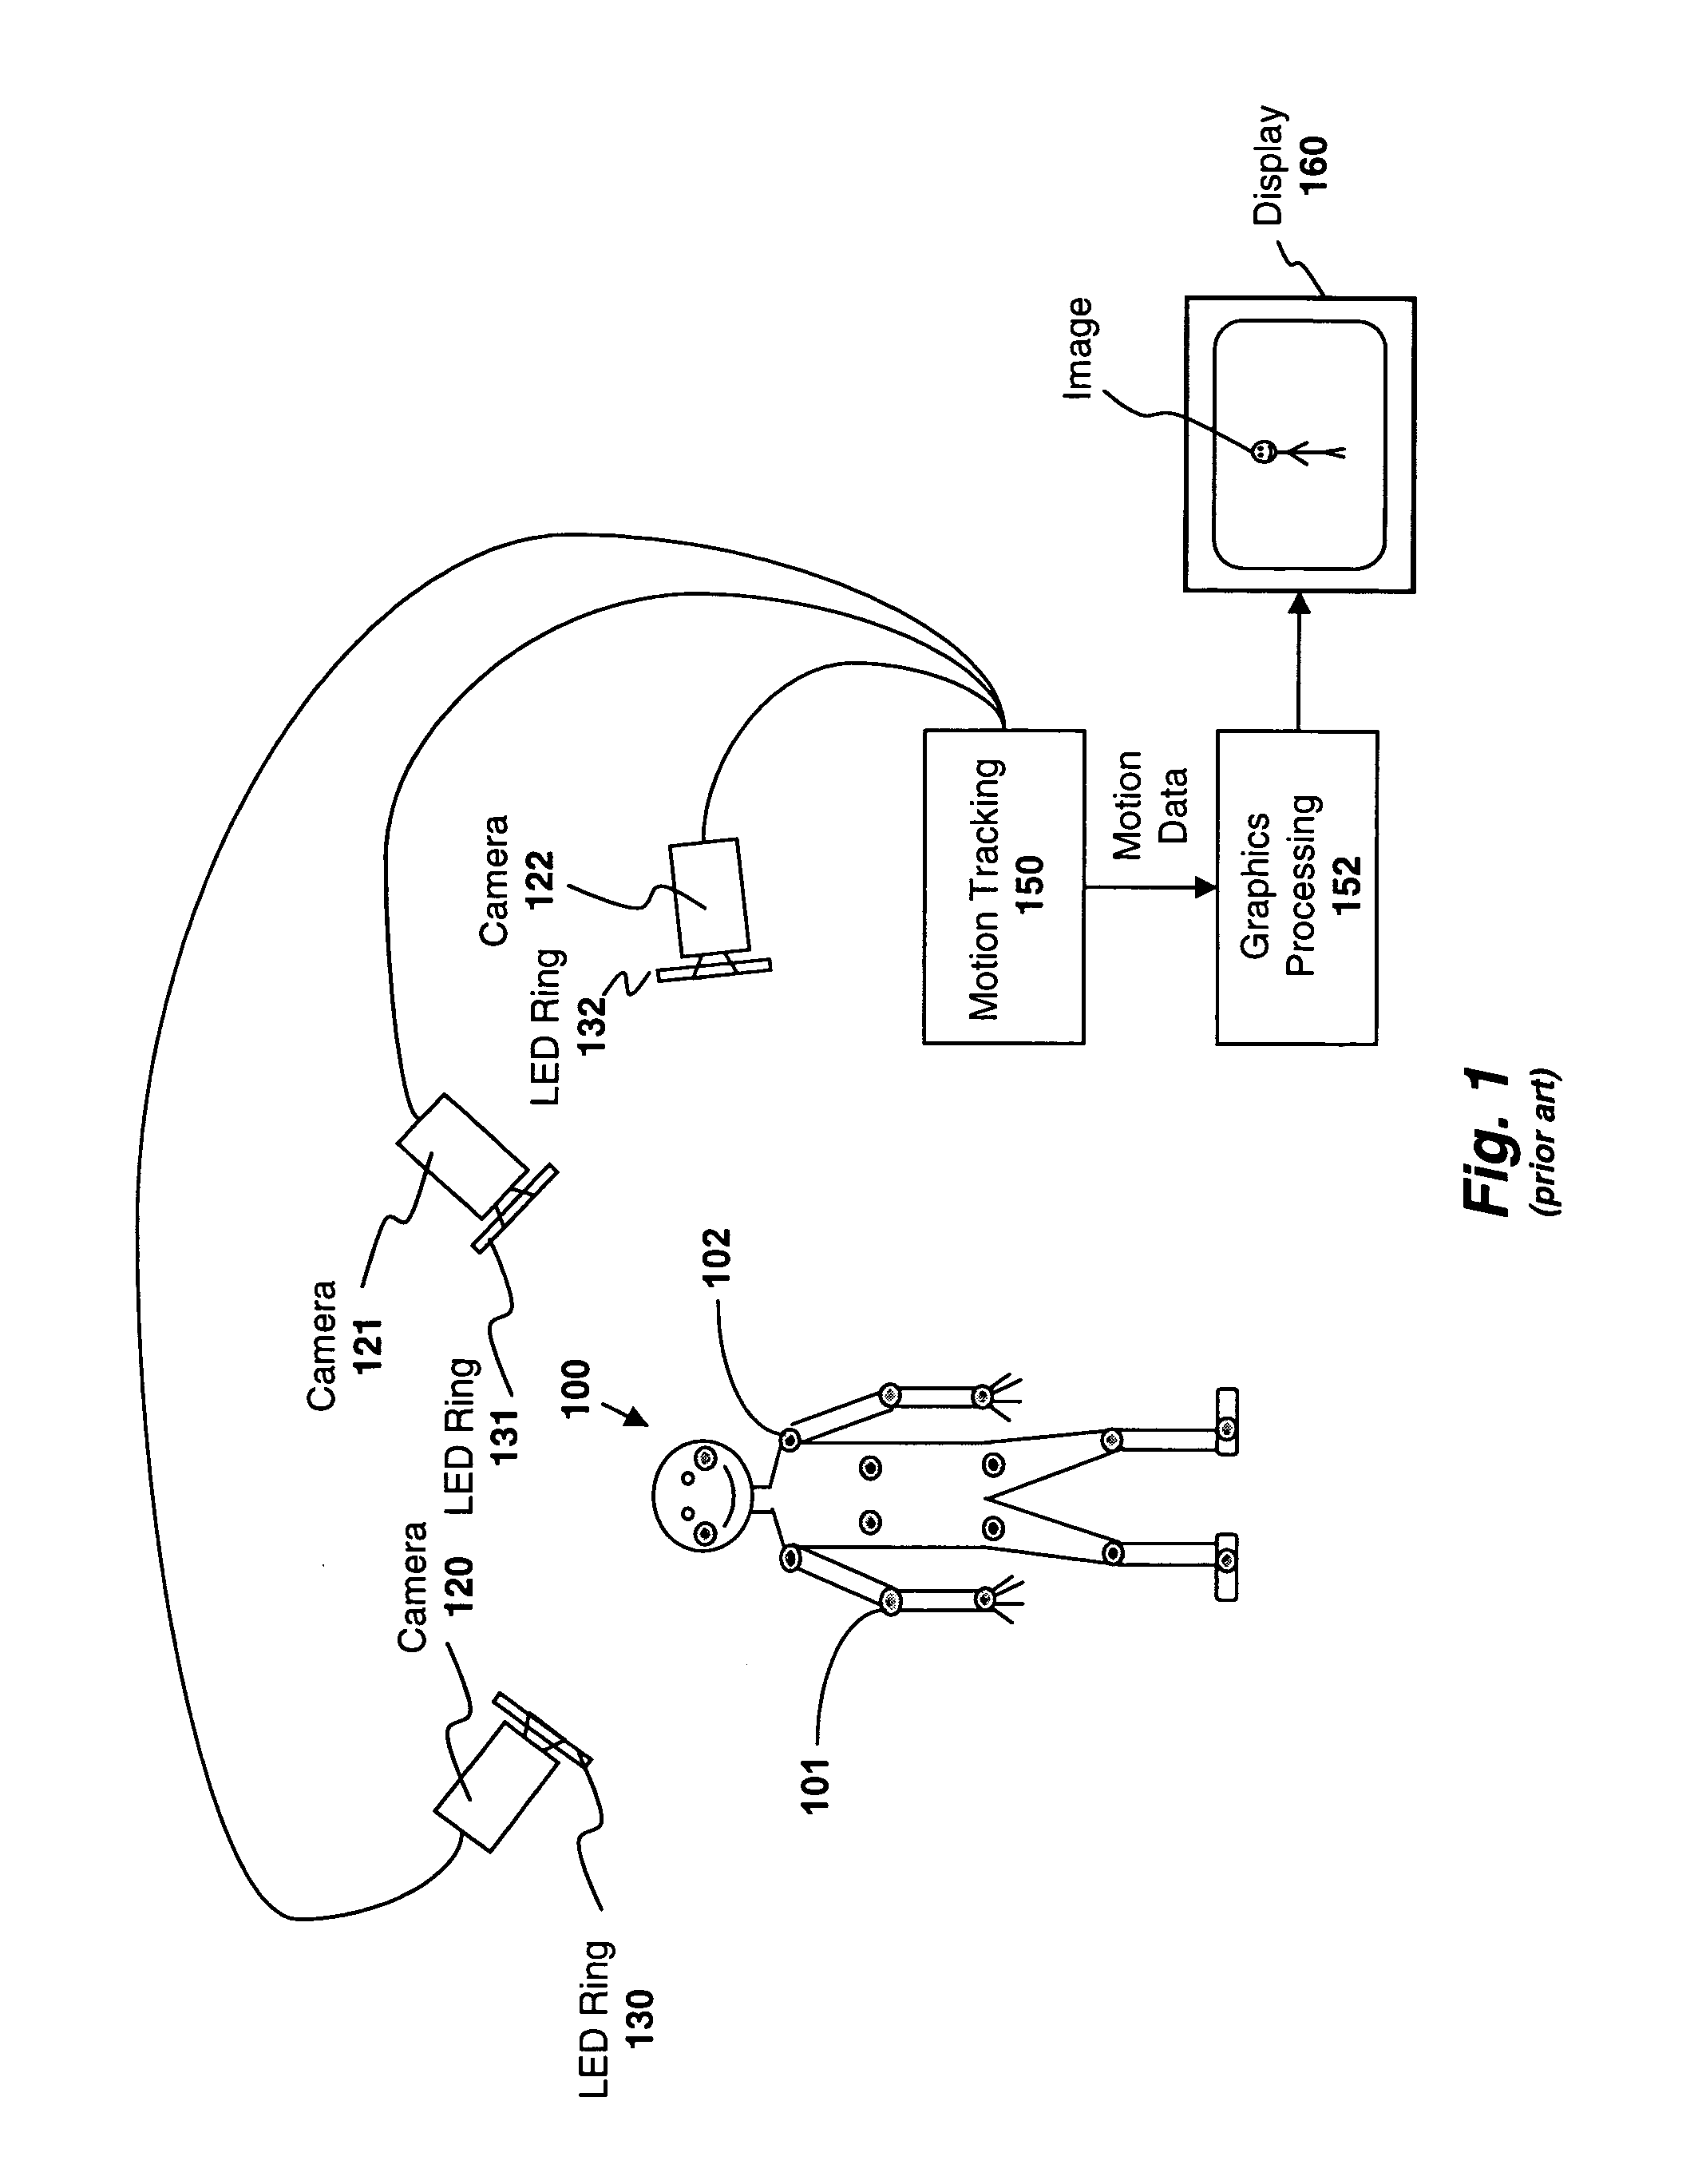 Apparatus and method for performing motion capture using a random pattern on capture surfaces